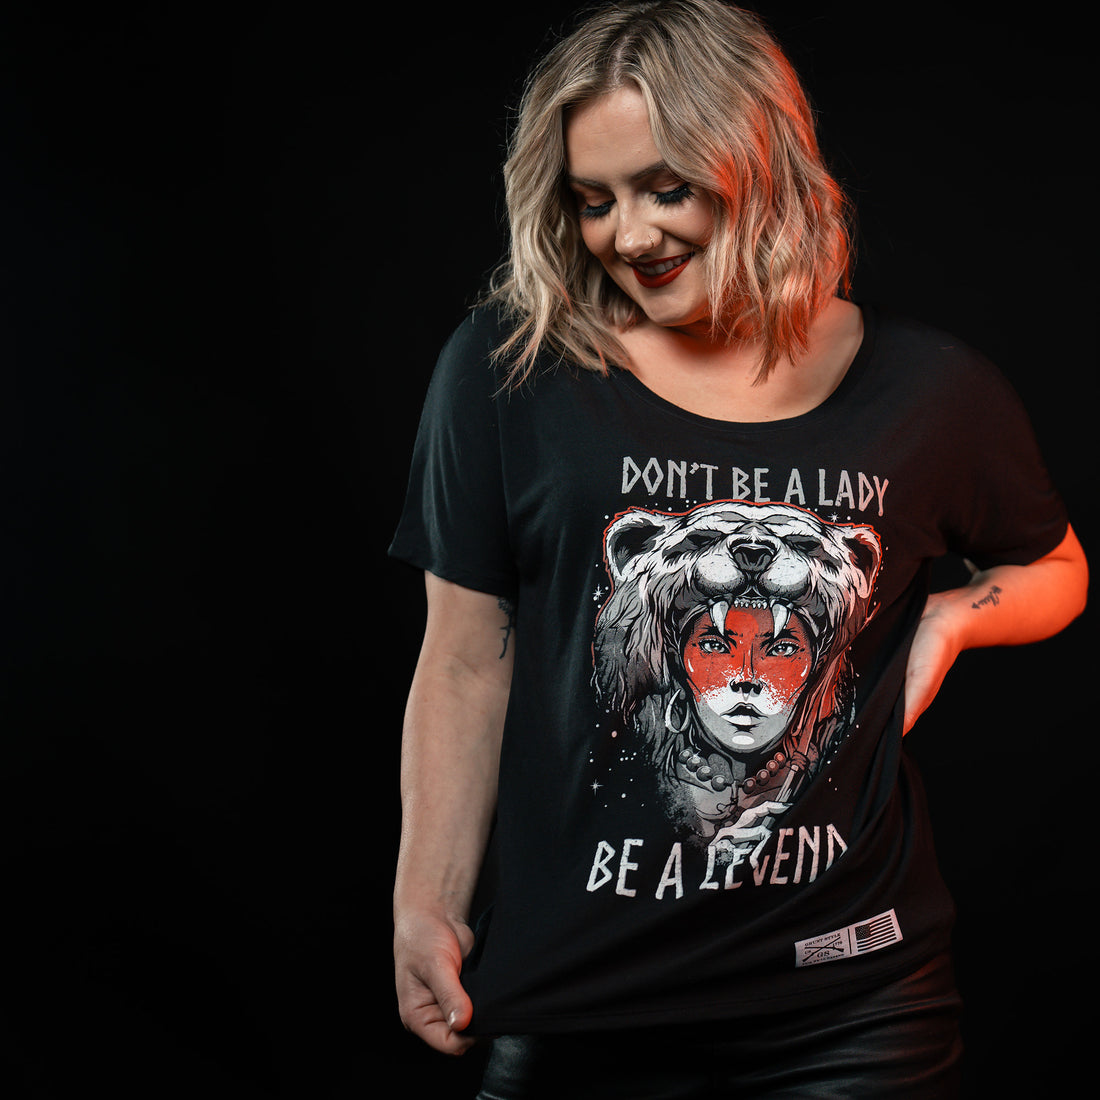 Be A Legend Shirts for Women 